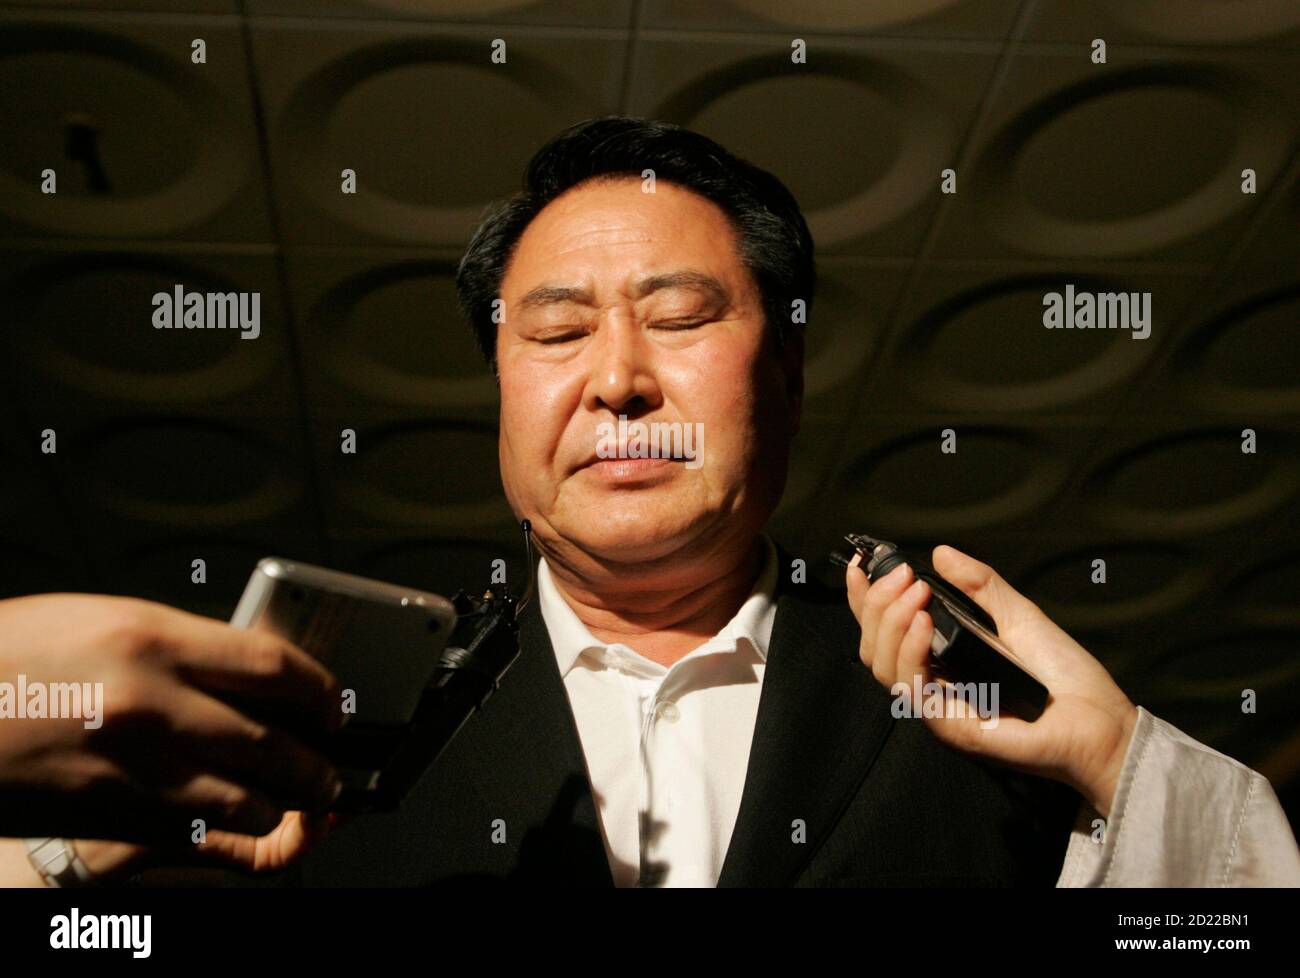 Sim Jin-pyo, the father of Sim Sung-min, 29, one of the kidnapped South Koreans in Afghanistan, speaks to the media after watching television news about him in Seongnam, south of Seoul, July 31, 2007. Taliban kidnappers shot dead a male South Korean hostage on Monday, accusing the Afghan government of not listening to rebel demands for the release of Taliban prisoners. The identity of the dead hostage has yet to be officially announced. REUTERS/Han Jae-Ho (SOUTH KOREA) Stock Photo